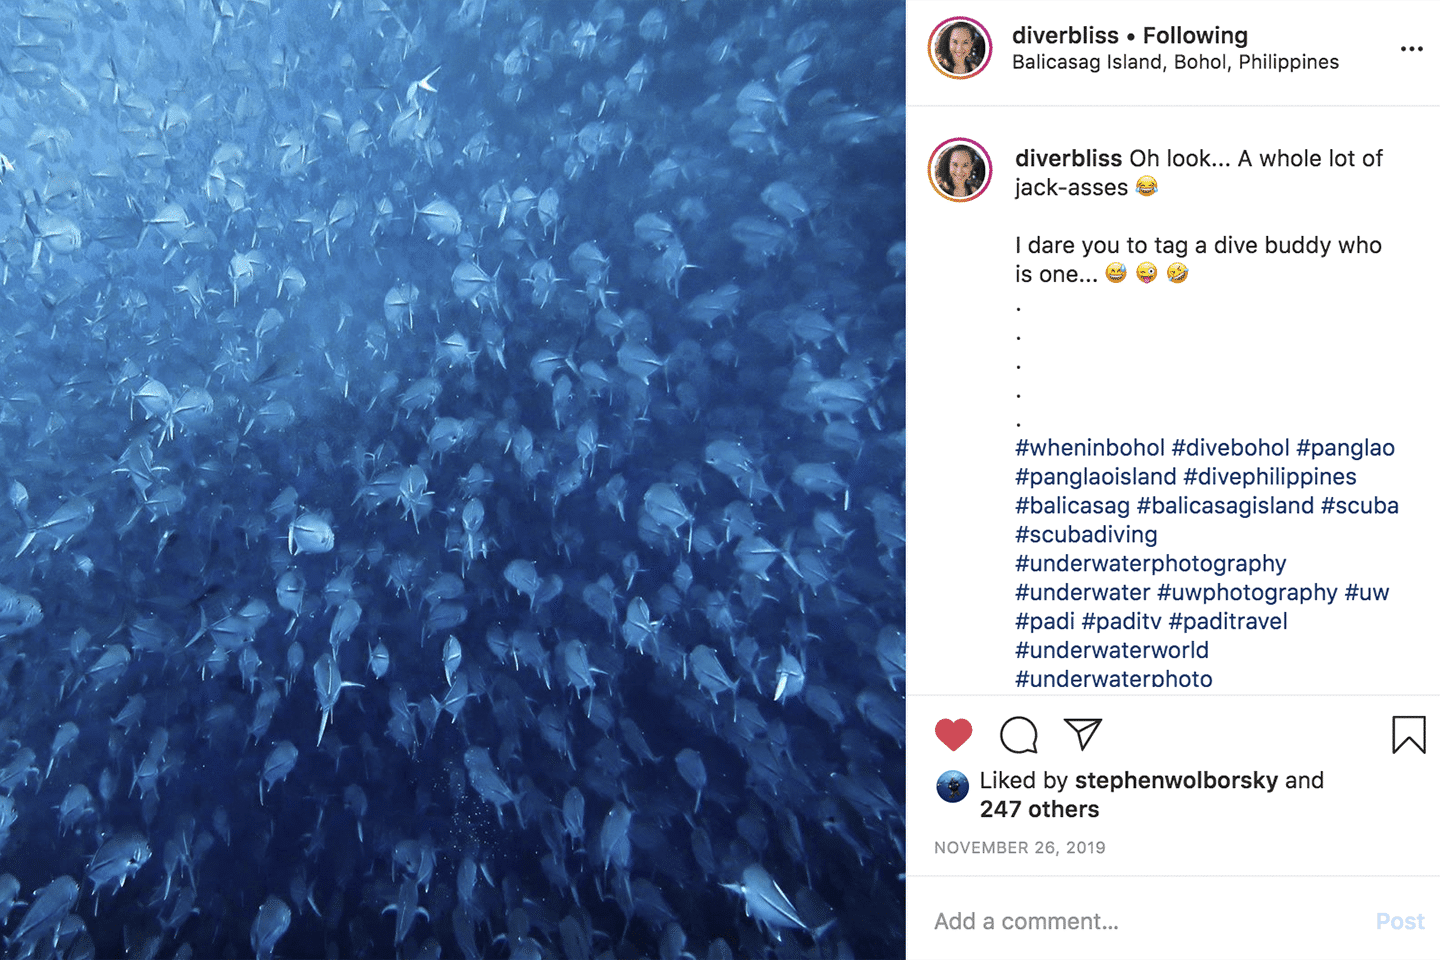 Creative Instagram Captions using fish puns and call to action for ocean advocates